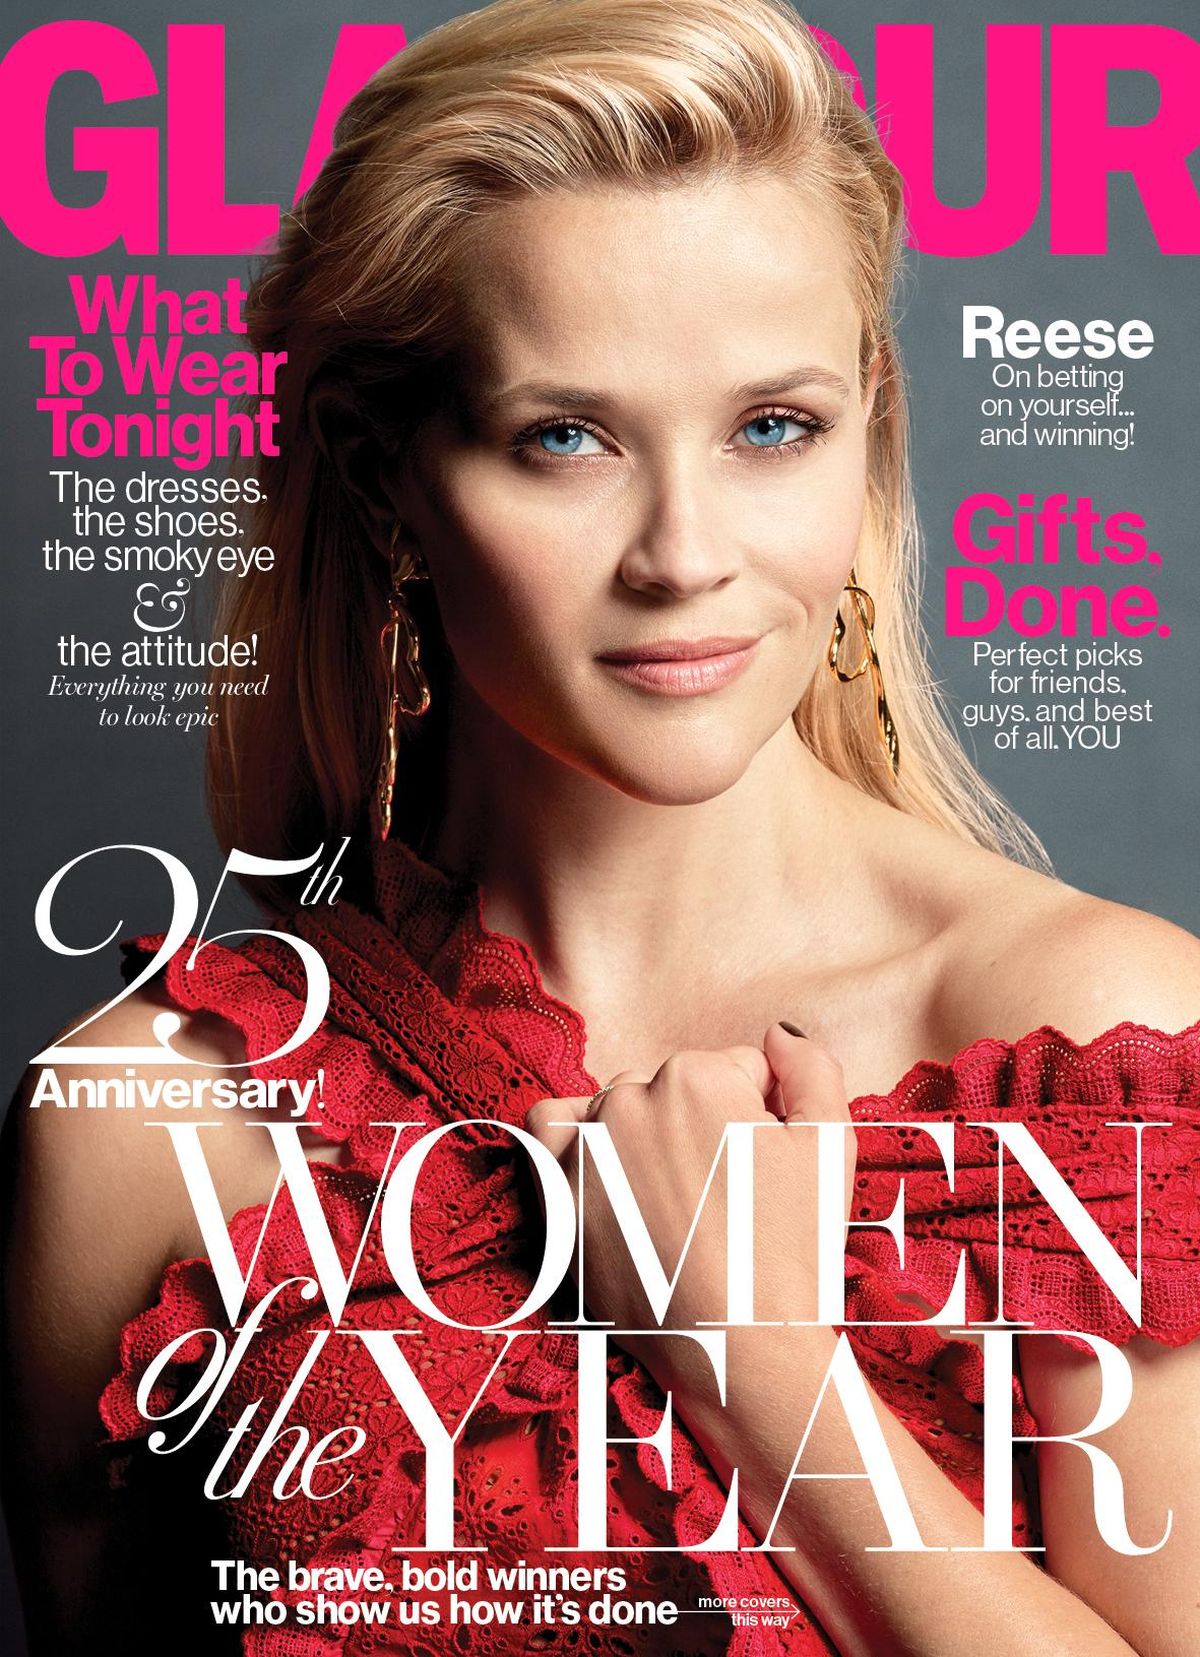 This image provided by Conde Nast shows actress Reese Witherspoon on the cover of Glamour magazine’s 25th Anniversary Women of Year issue. (Tom Munro / Associated Press)